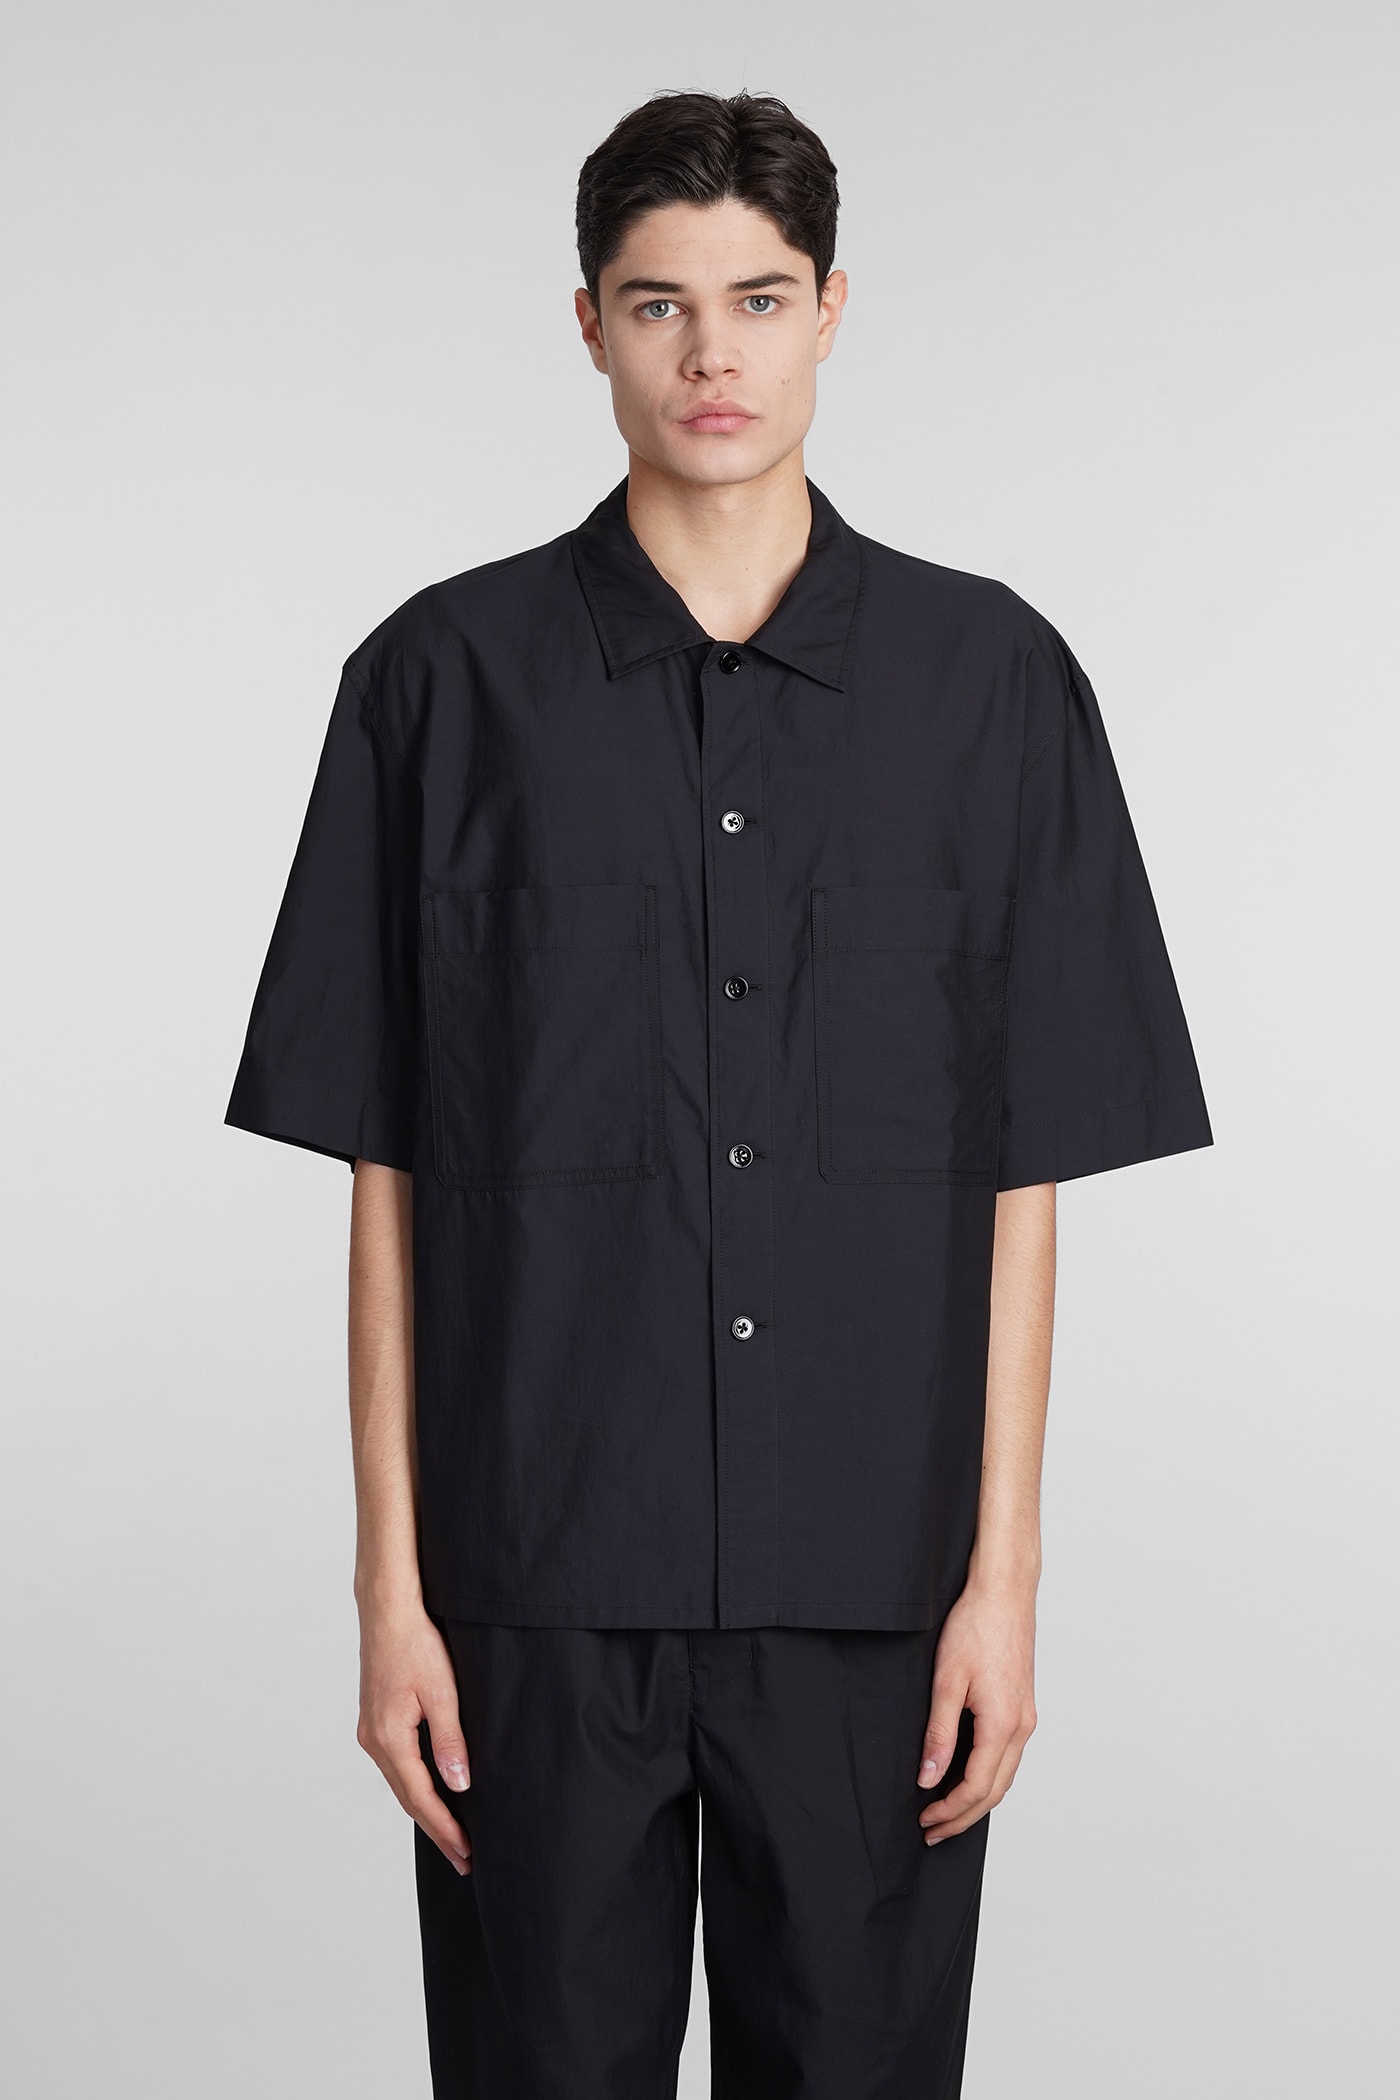 LEMAIRE SHIRT IN BLACK COTTON